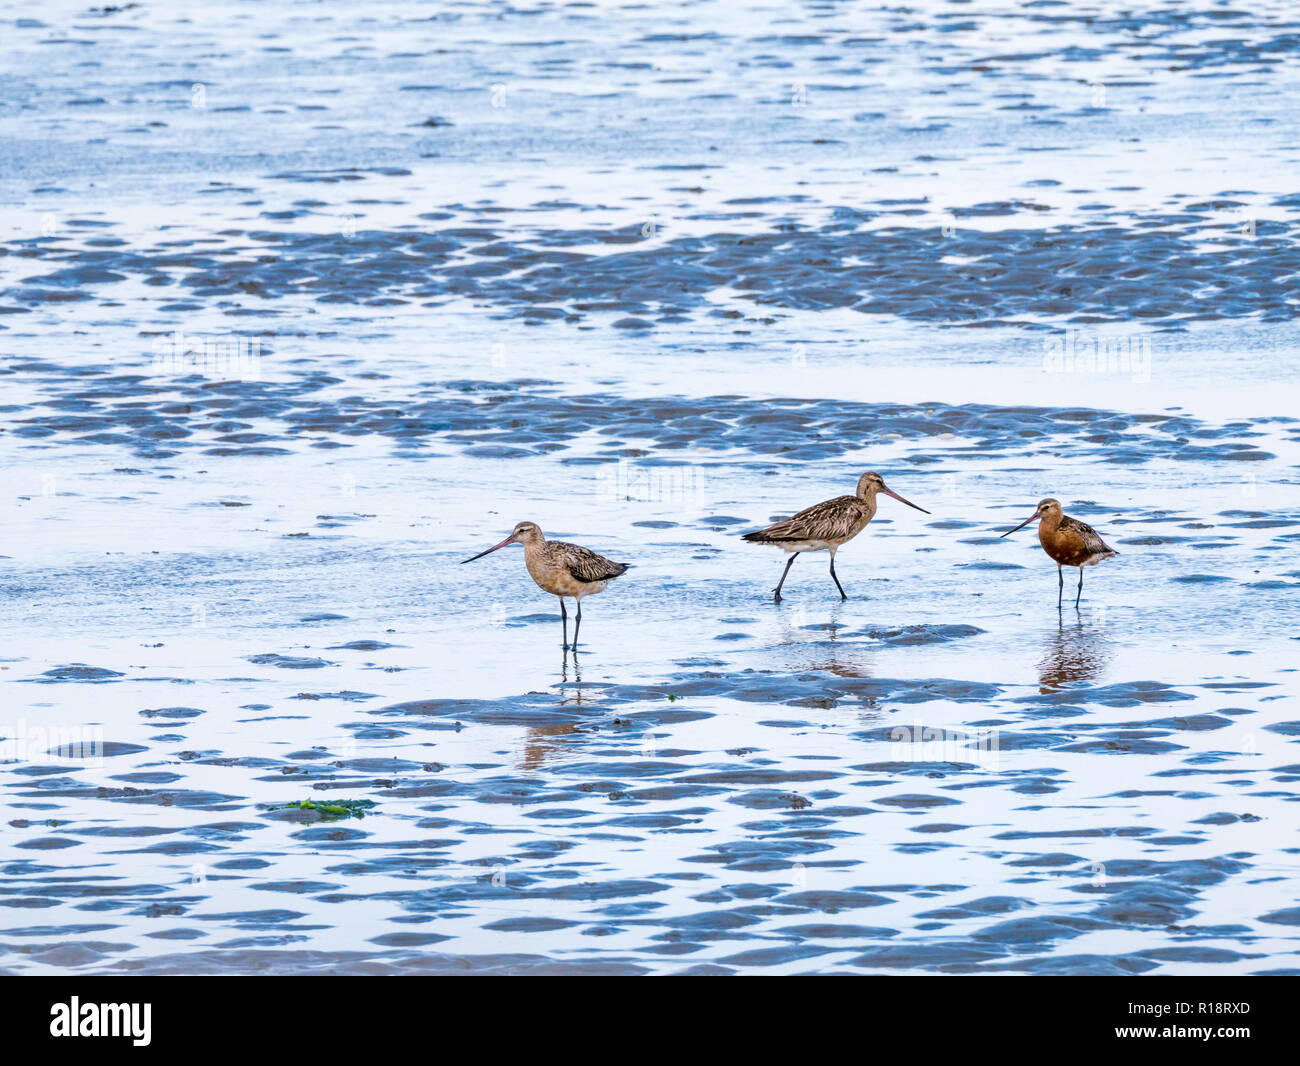 Three adult bar-tailed godwits, Limosa lapponica, feeding on mud flat at low tide of Wadden sea, Netherlands Stock Photo